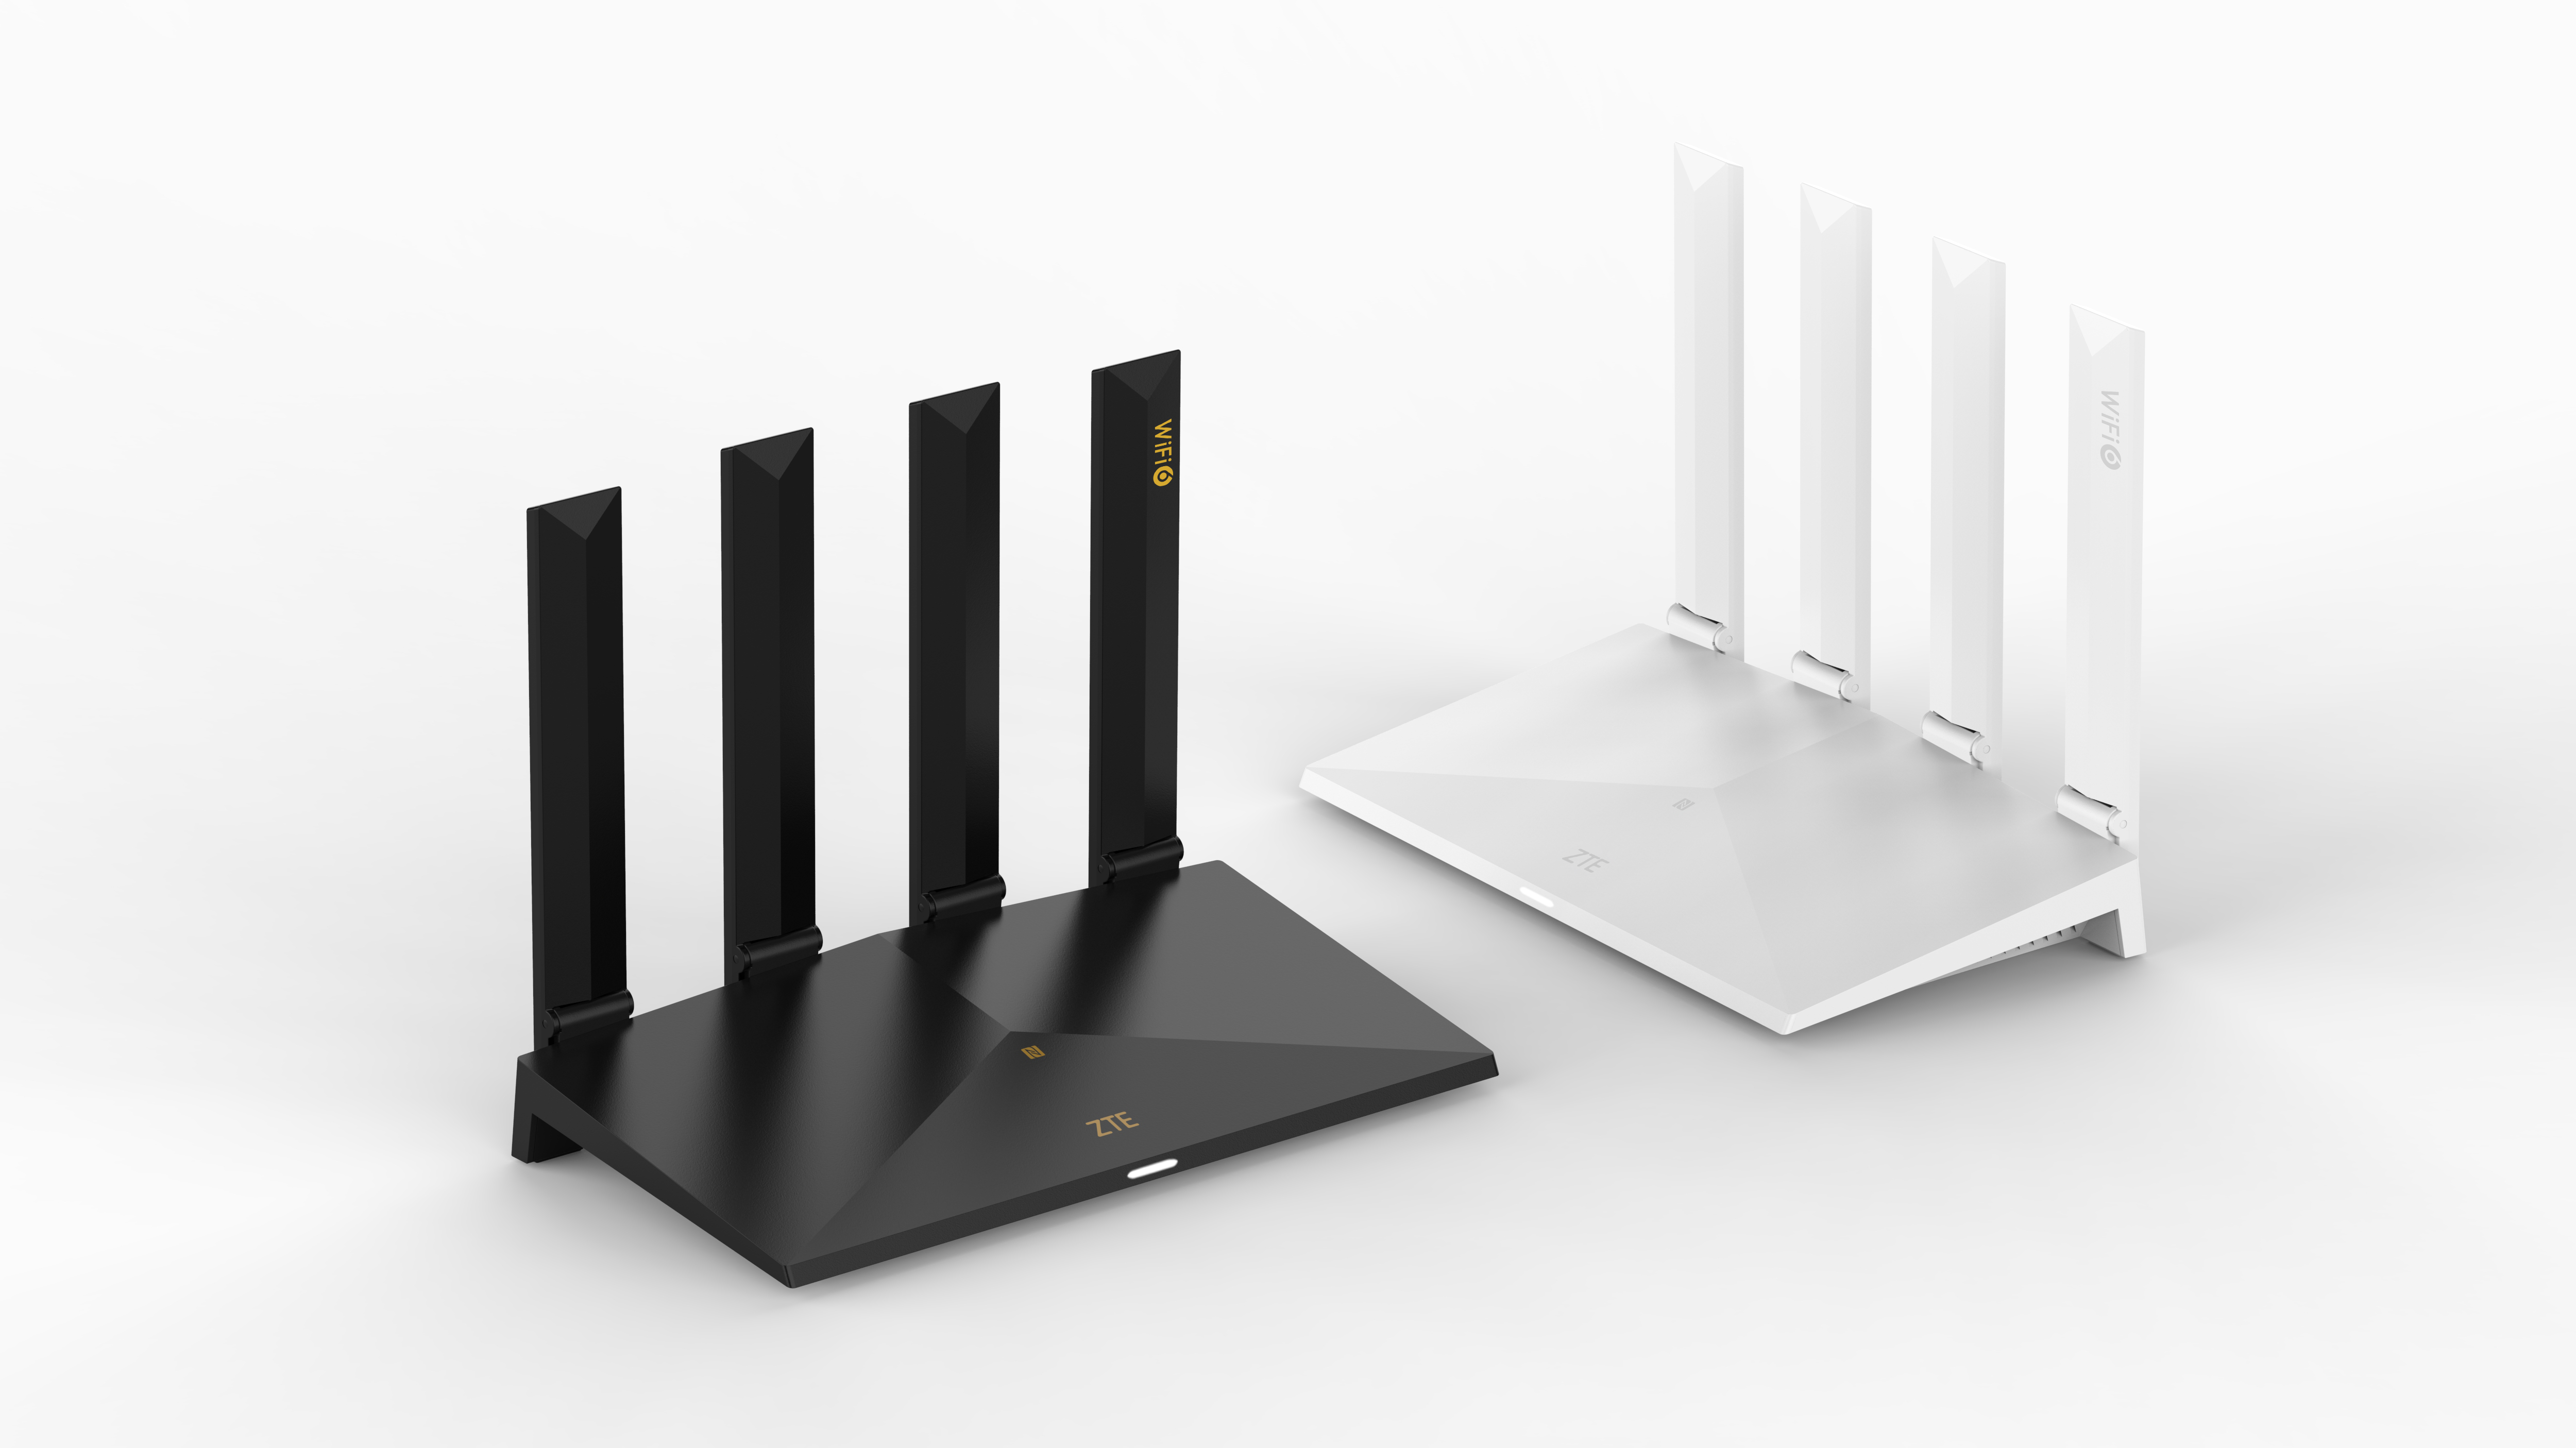 ZTE AX3000 Pro router launches with Wi-Fi 6 support, high-gain antennae and NFC thumbnail